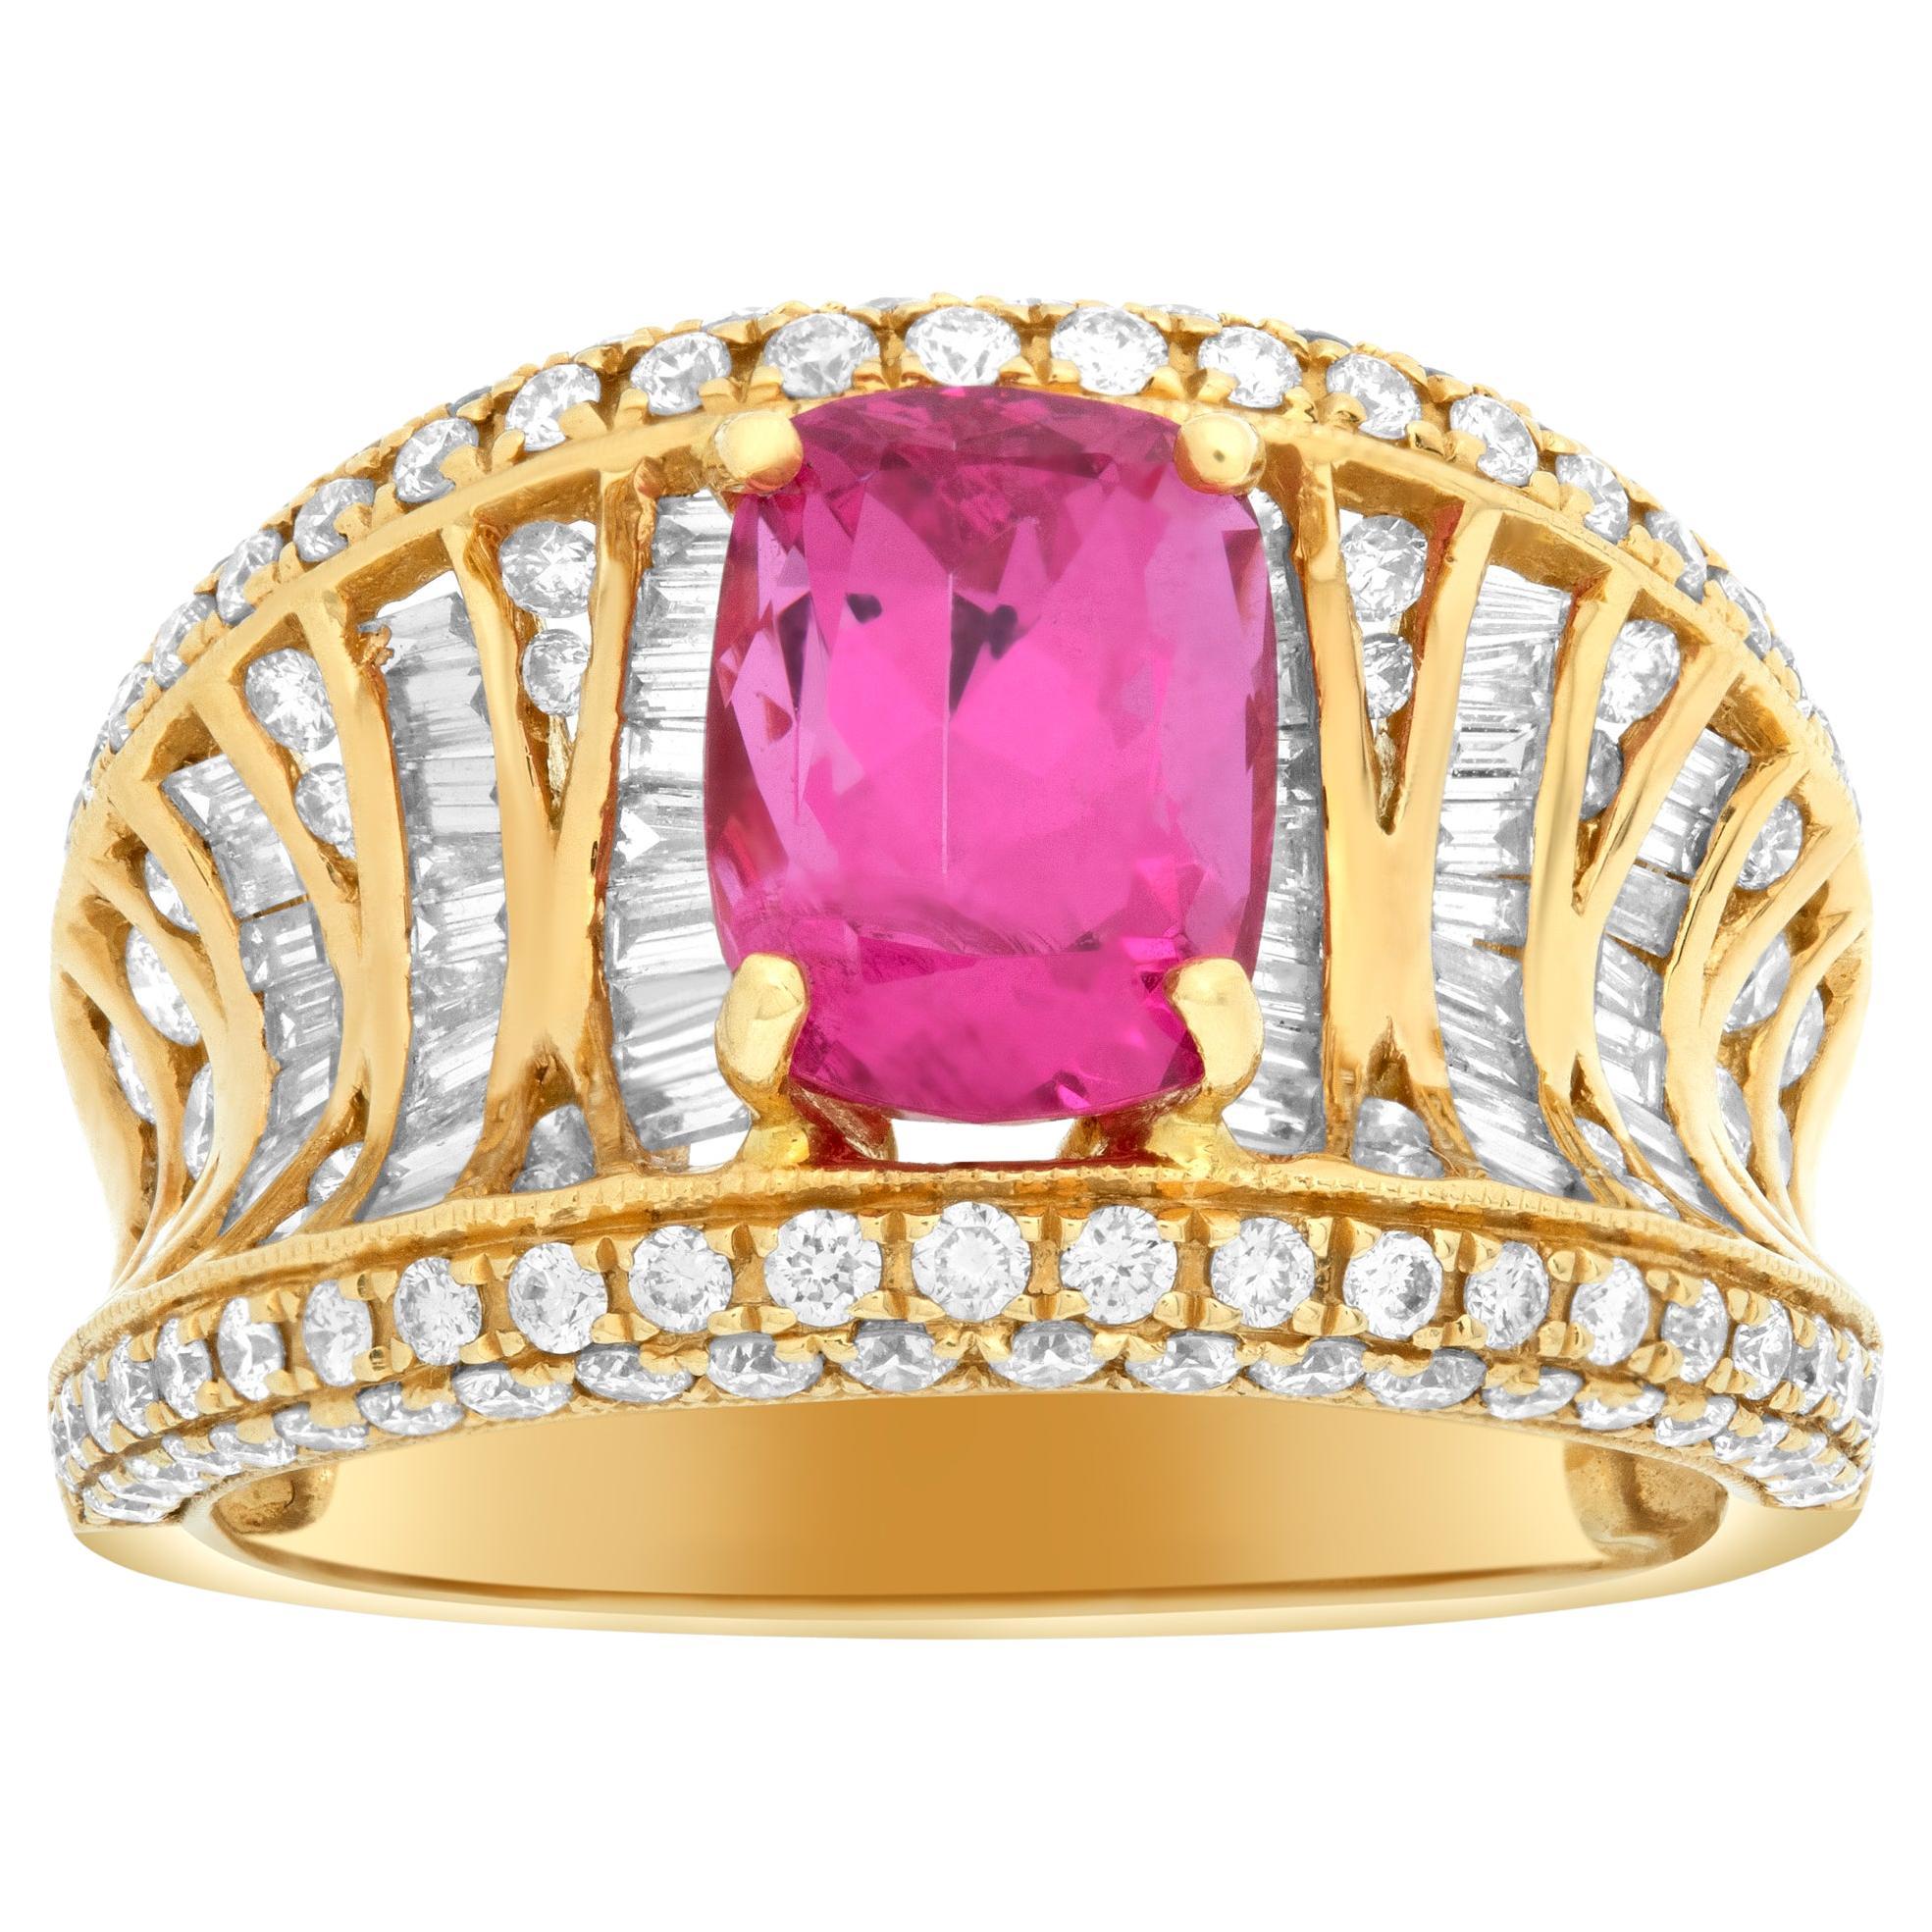 18k Yellow Gold Ring with Oval Brilliant Cut Pink Spinel '2.73 Carats' & Diamond For Sale